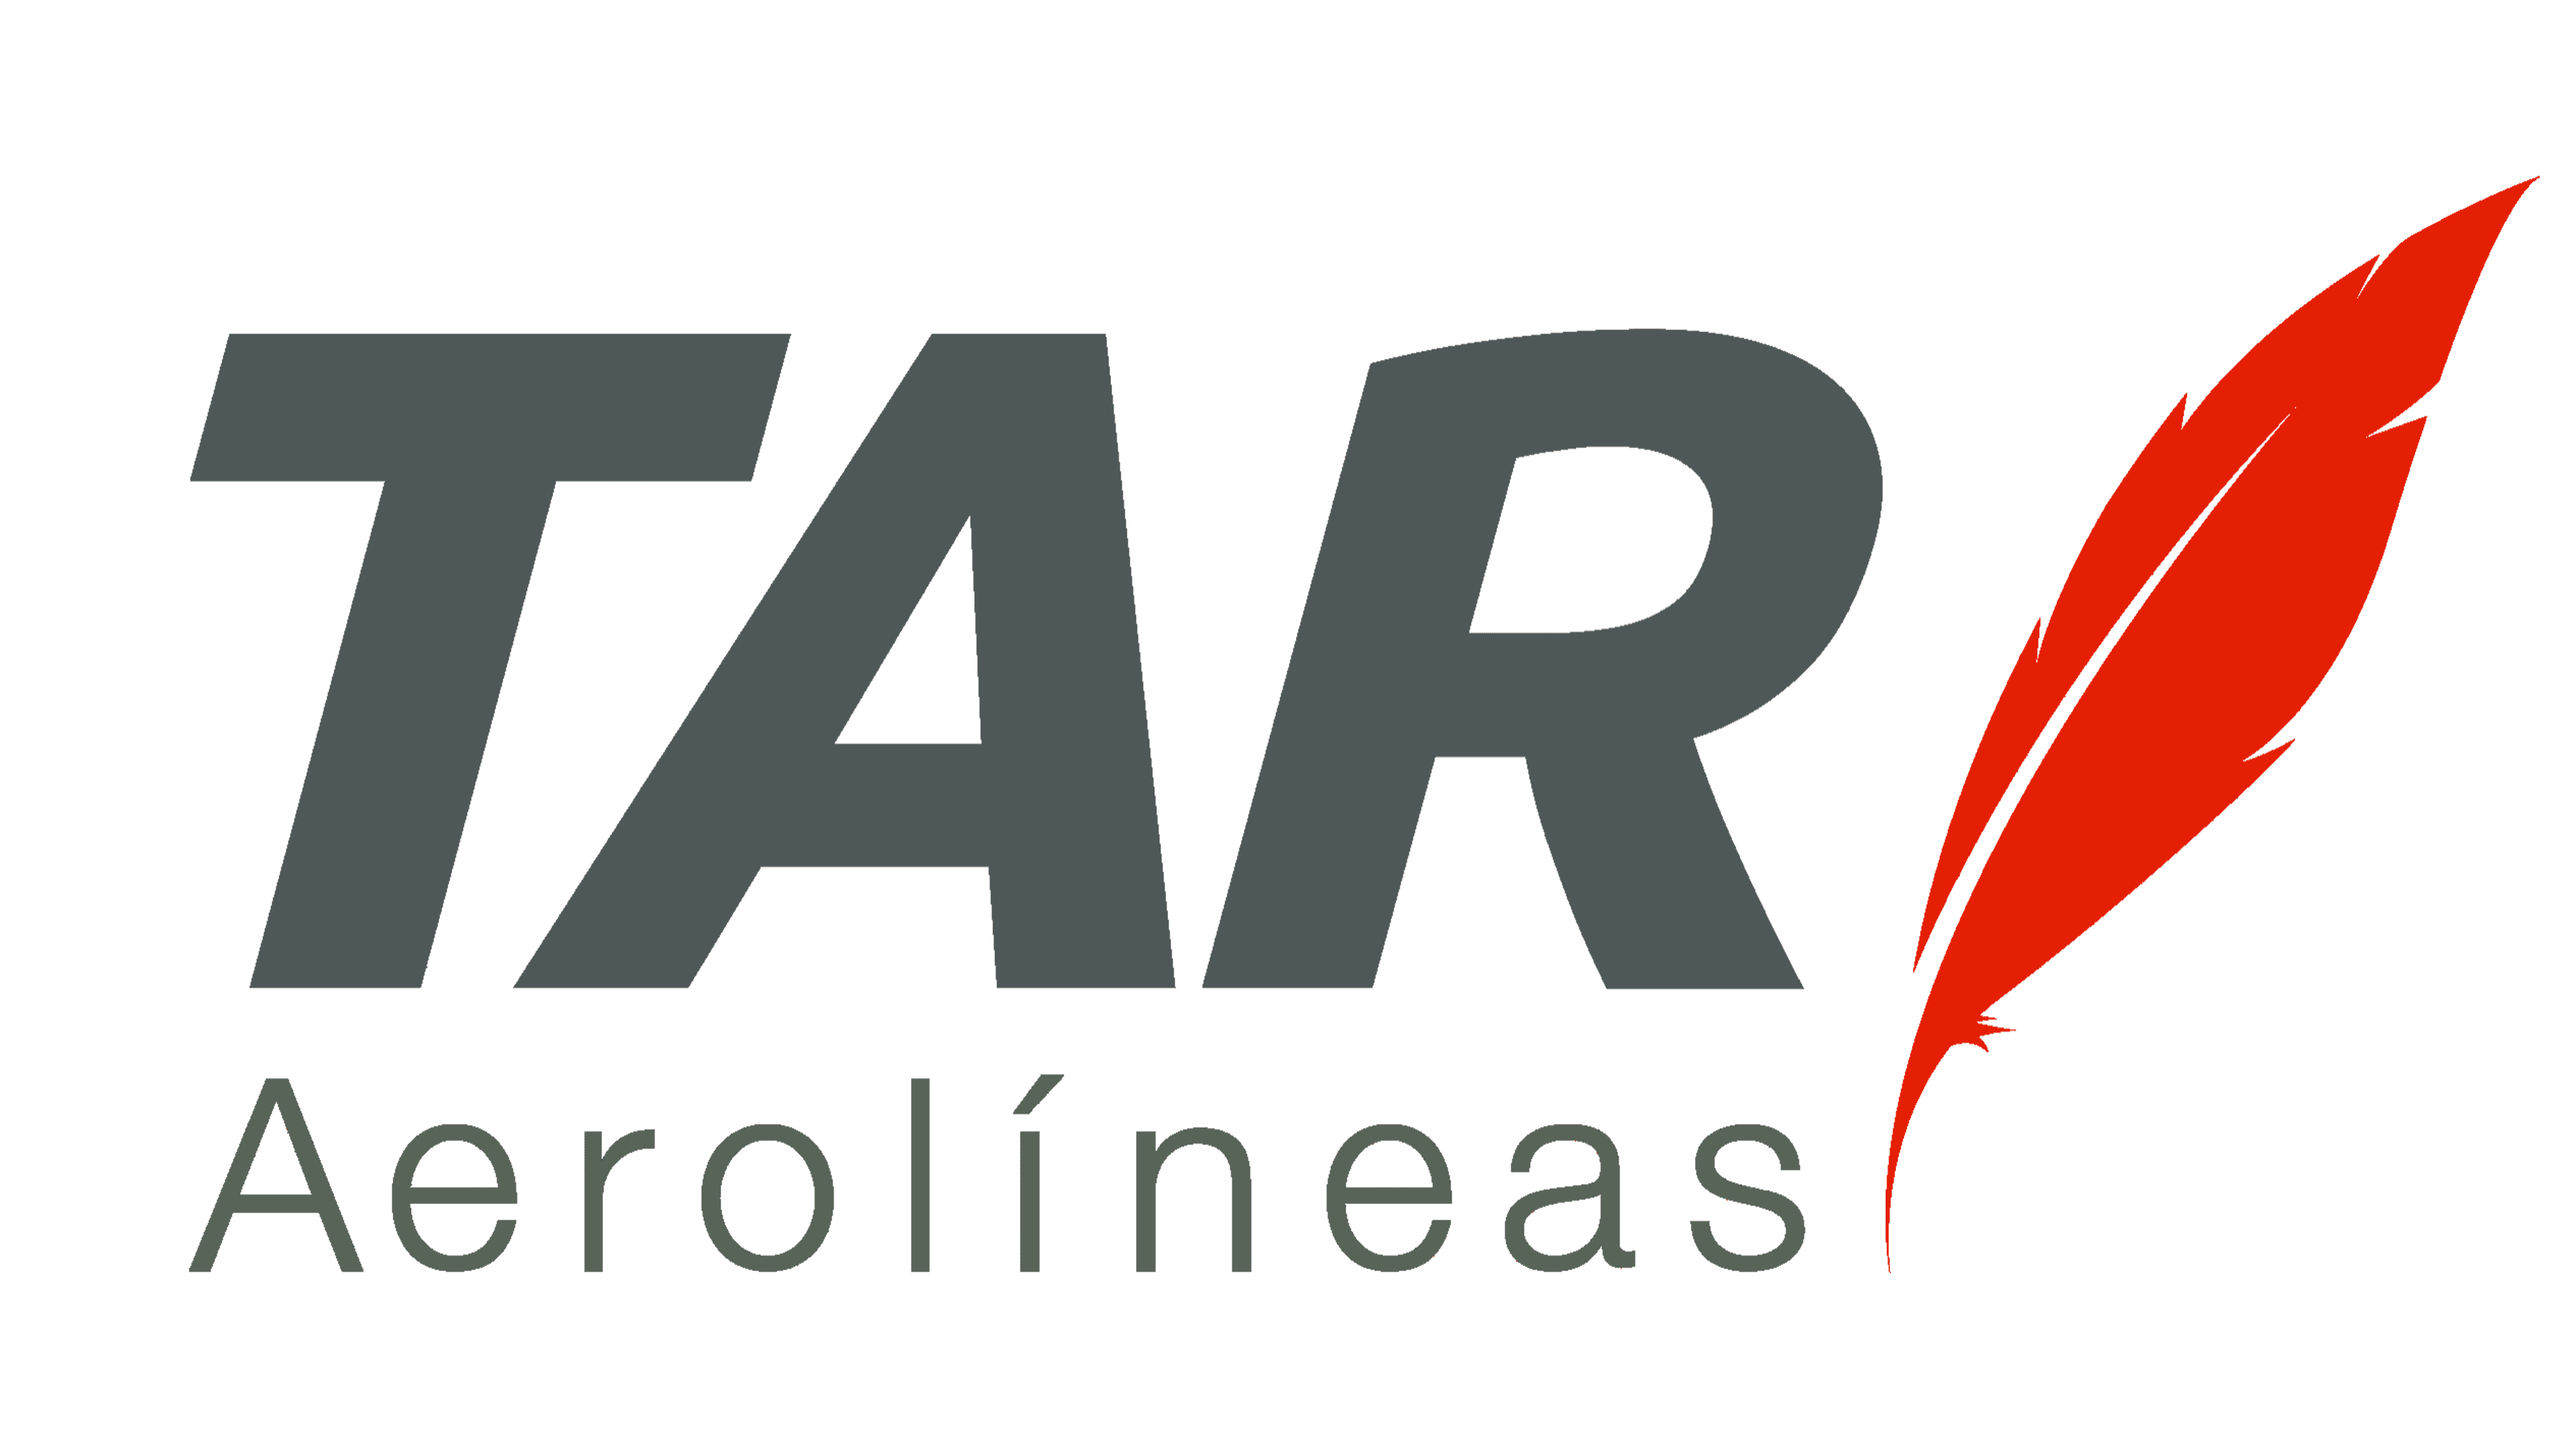 TAR Aerolineas Logo and symbol, meaning, history, PNG, brand